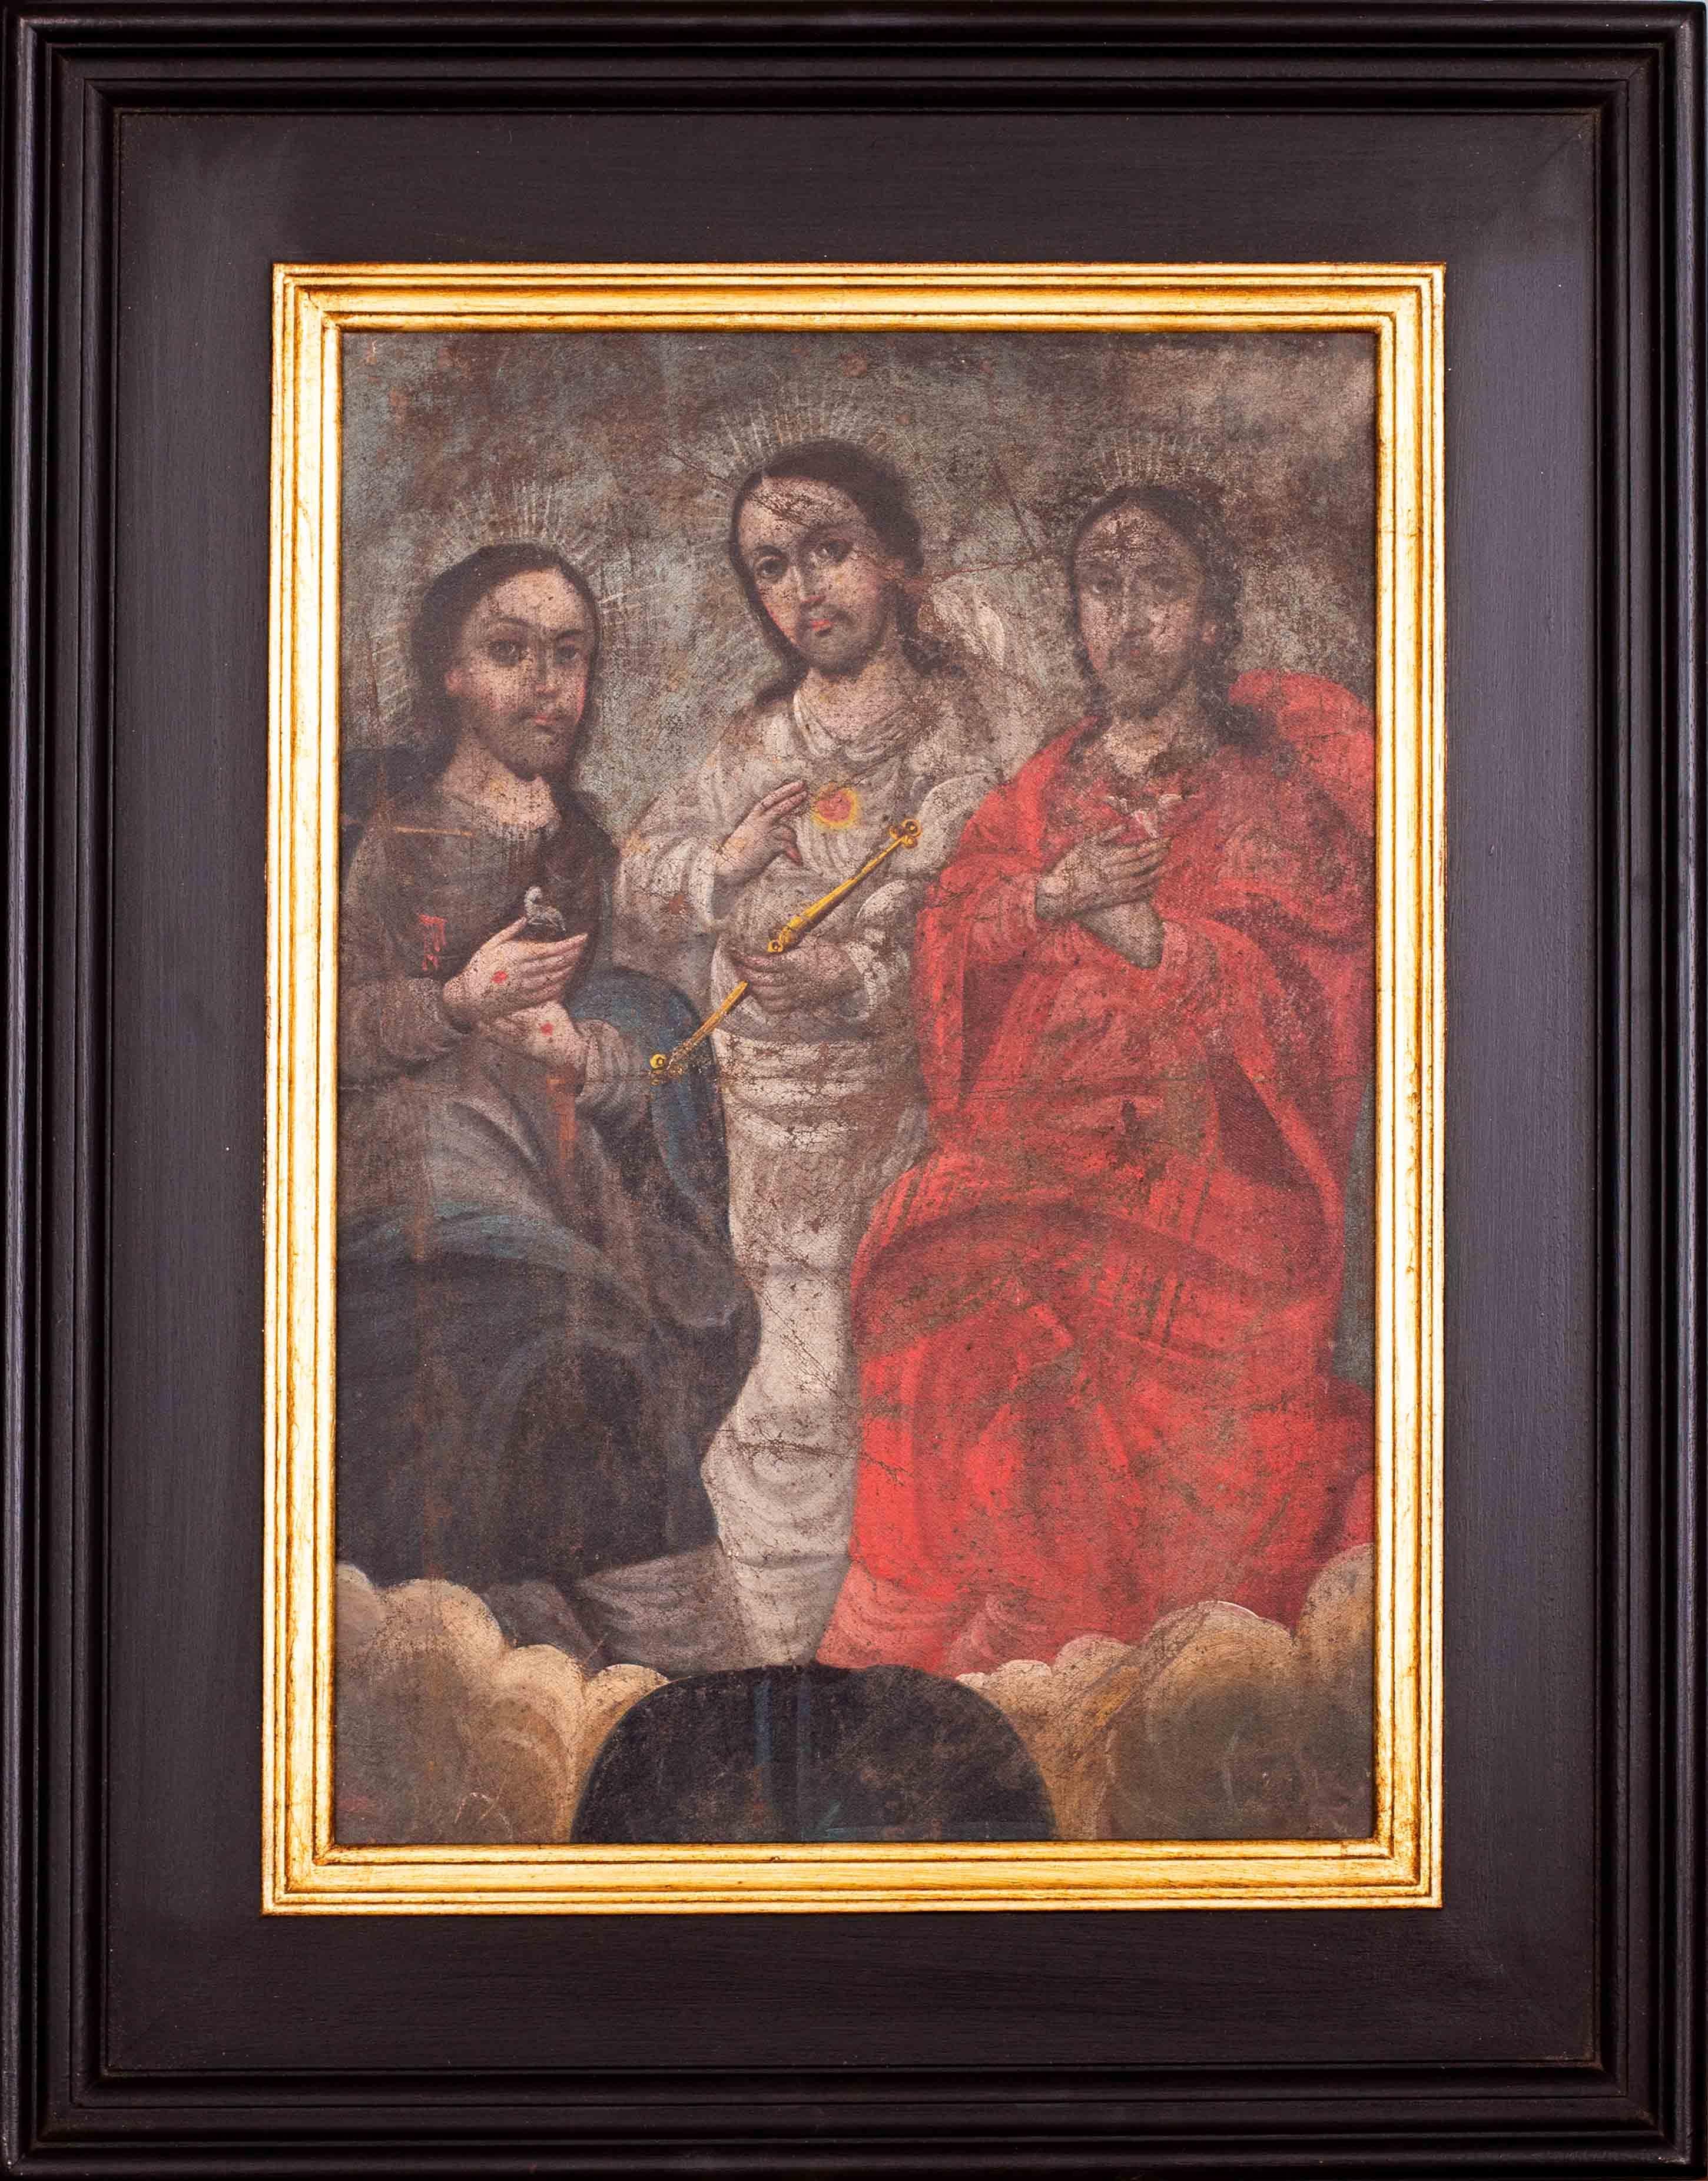 Unknown Figurative Painting - 17th Century Spanish school oil painting of the Holy Trinity